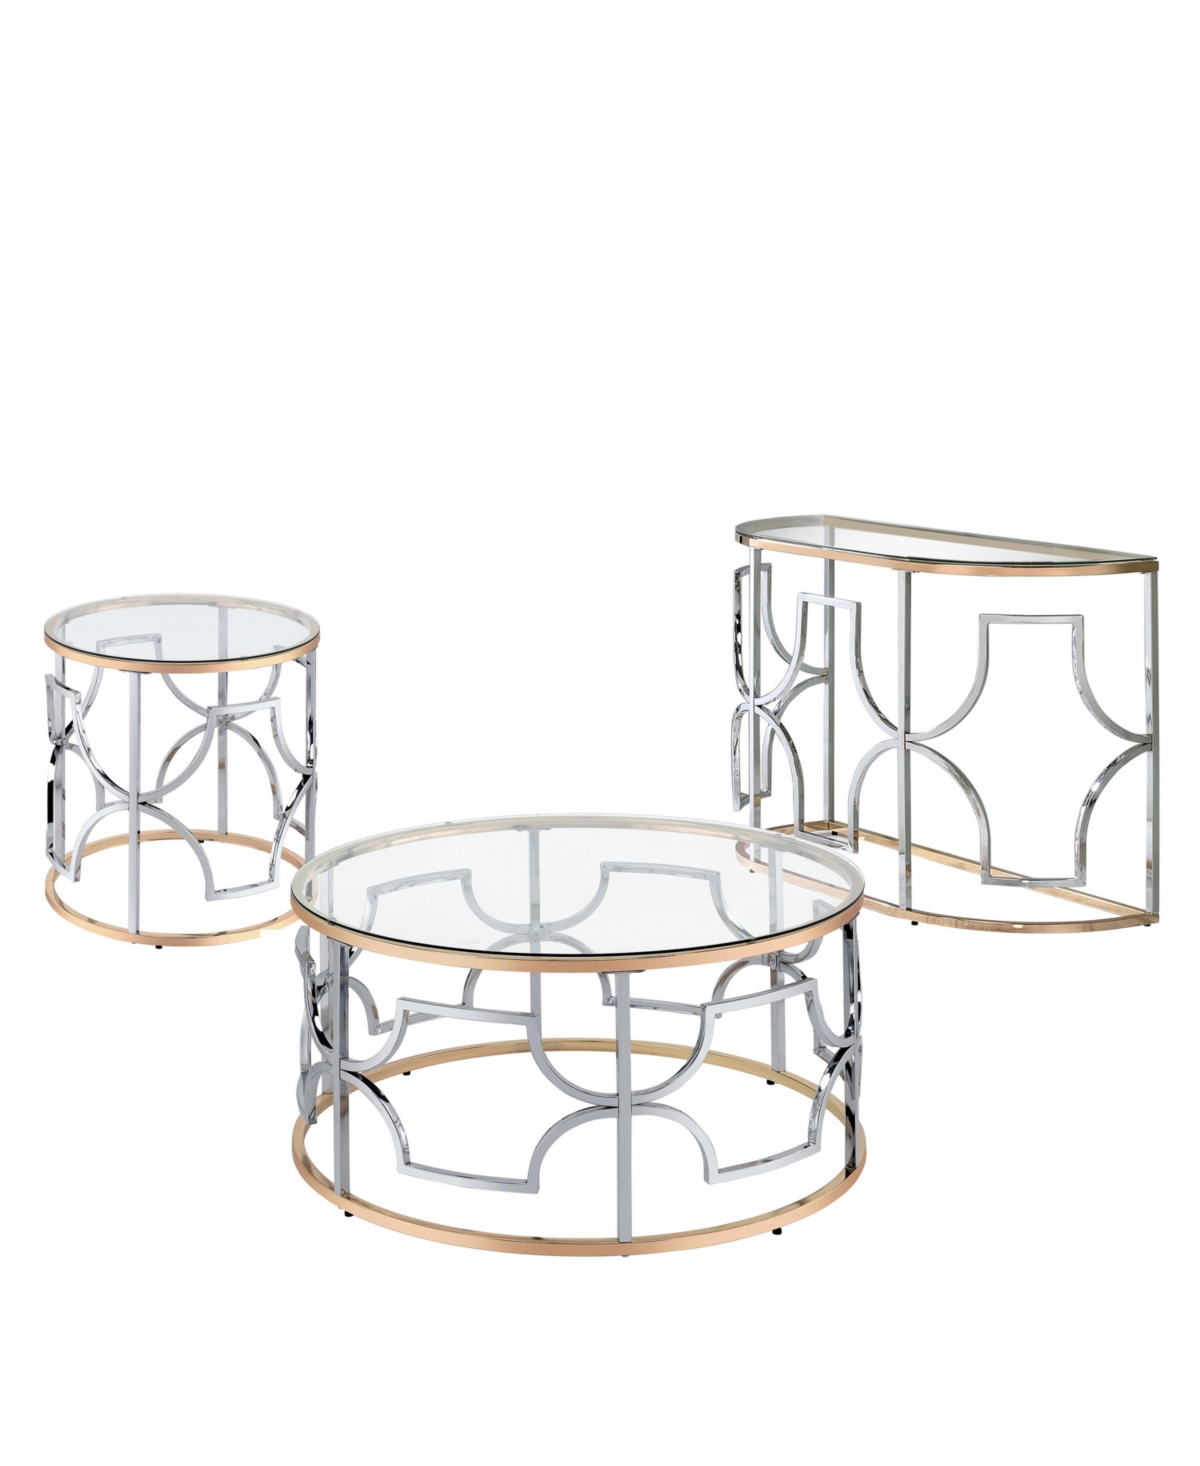 Furniture Of America 3-piece Metal, Glass Camille Modern Tempered Glass Top Table Set In Chrome And Gold